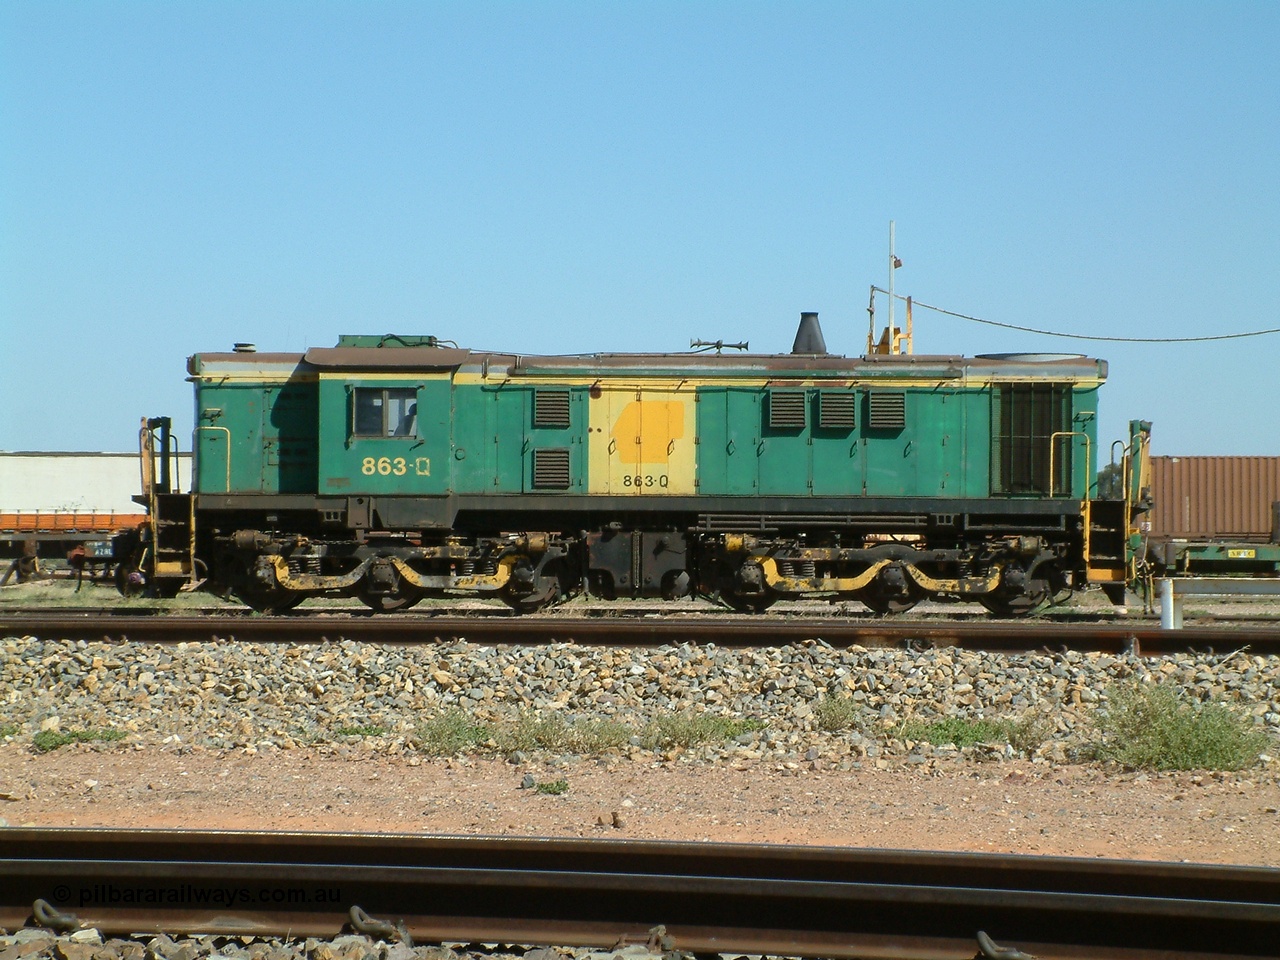 030404 103031
Port Augusta, Spencer Junction shunt loco 830 class unit 863 serial 84709 is an AE Goodwin built ALCo DL531 model and entered service in June 1963. 4th April 2003.
Keywords: 830-class;863;84709;AE-Goodwin;ALCo;DL531;